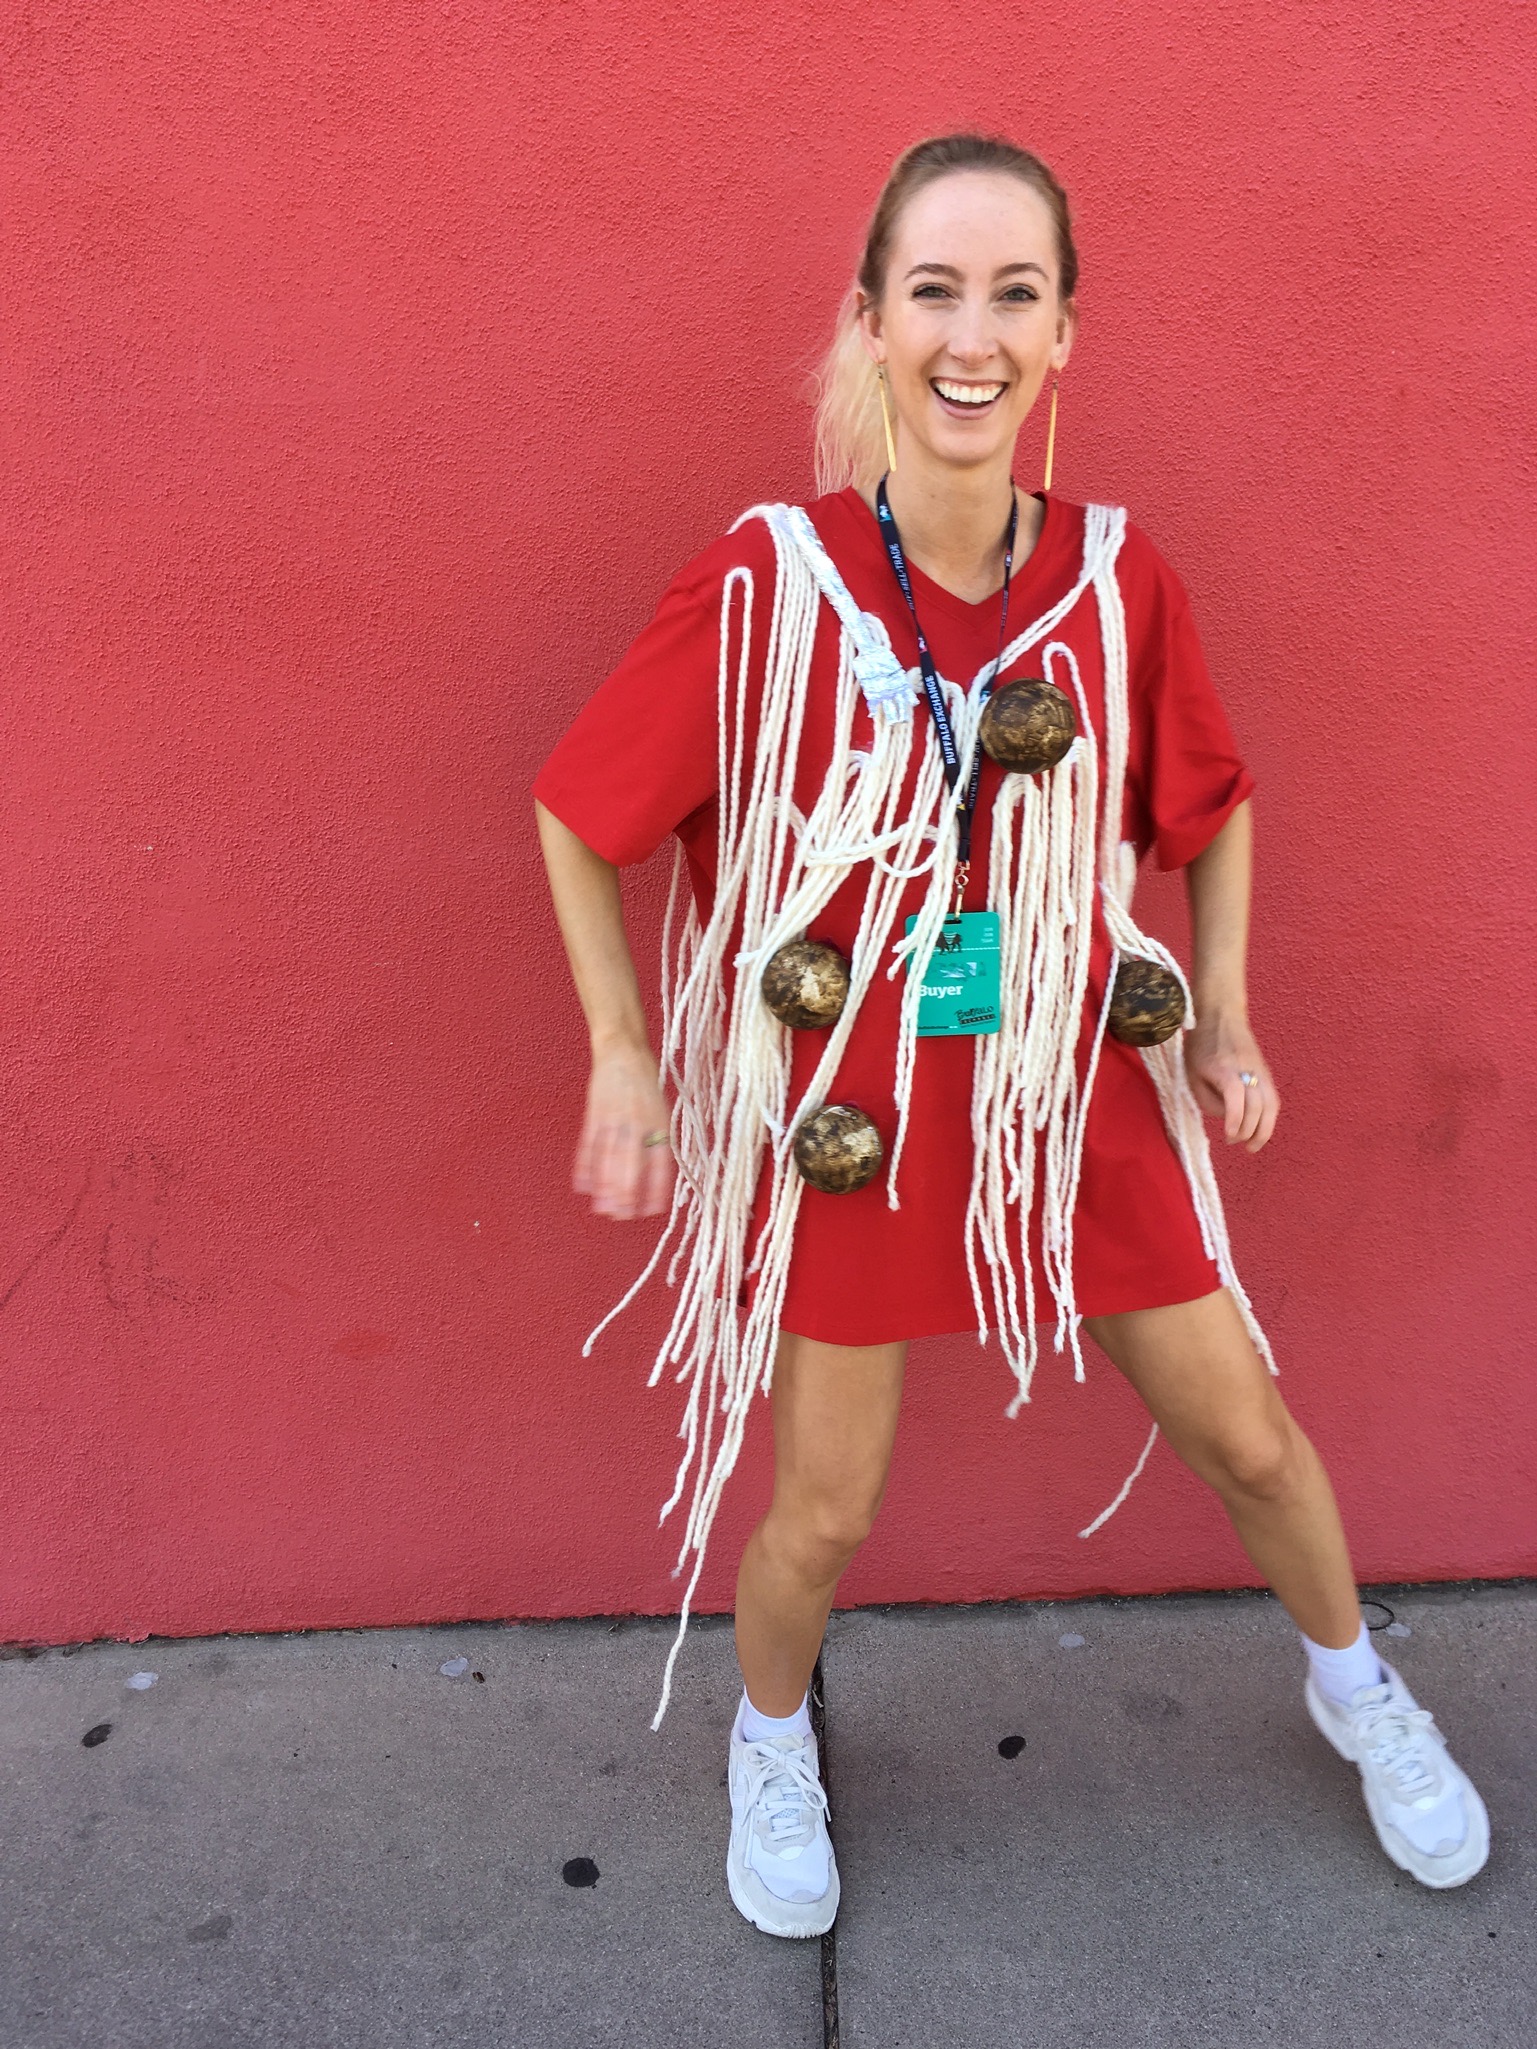 DIY Spaghetti and Meatball costume made with red t-shirt and yarn, costumes for Halloween 2020